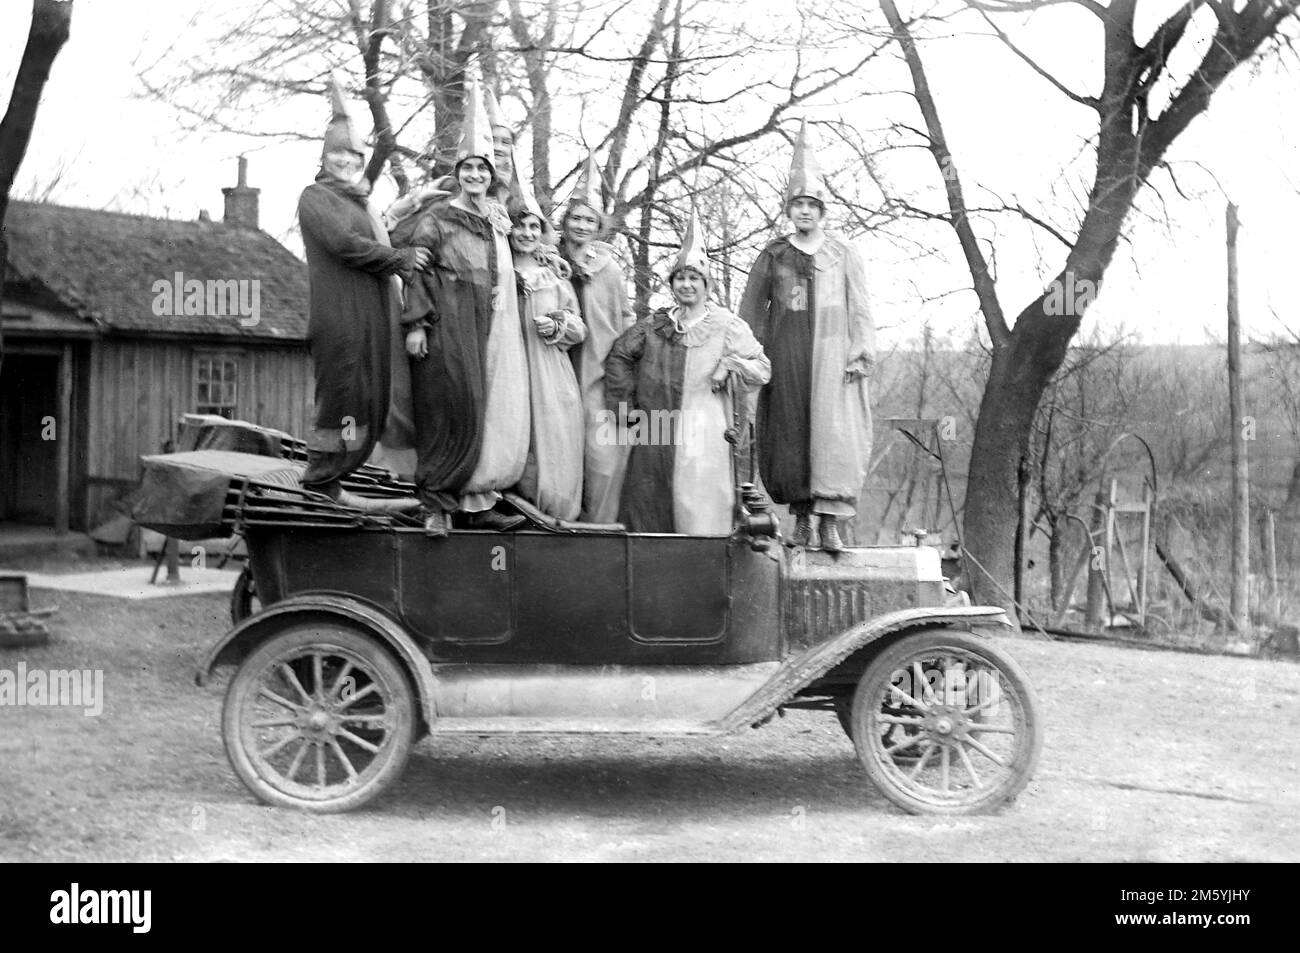 Costumed young people stand on top of their period automobile, ca. 1925. Stock Photo